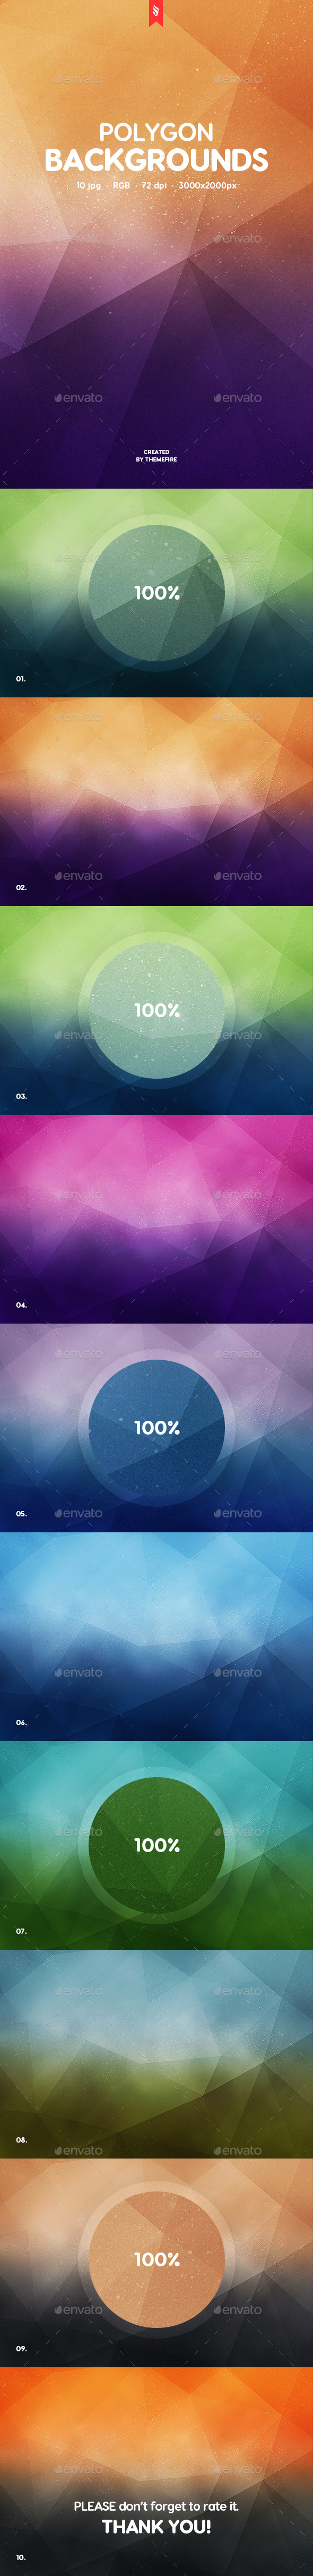 10 Polygon Backgrounds